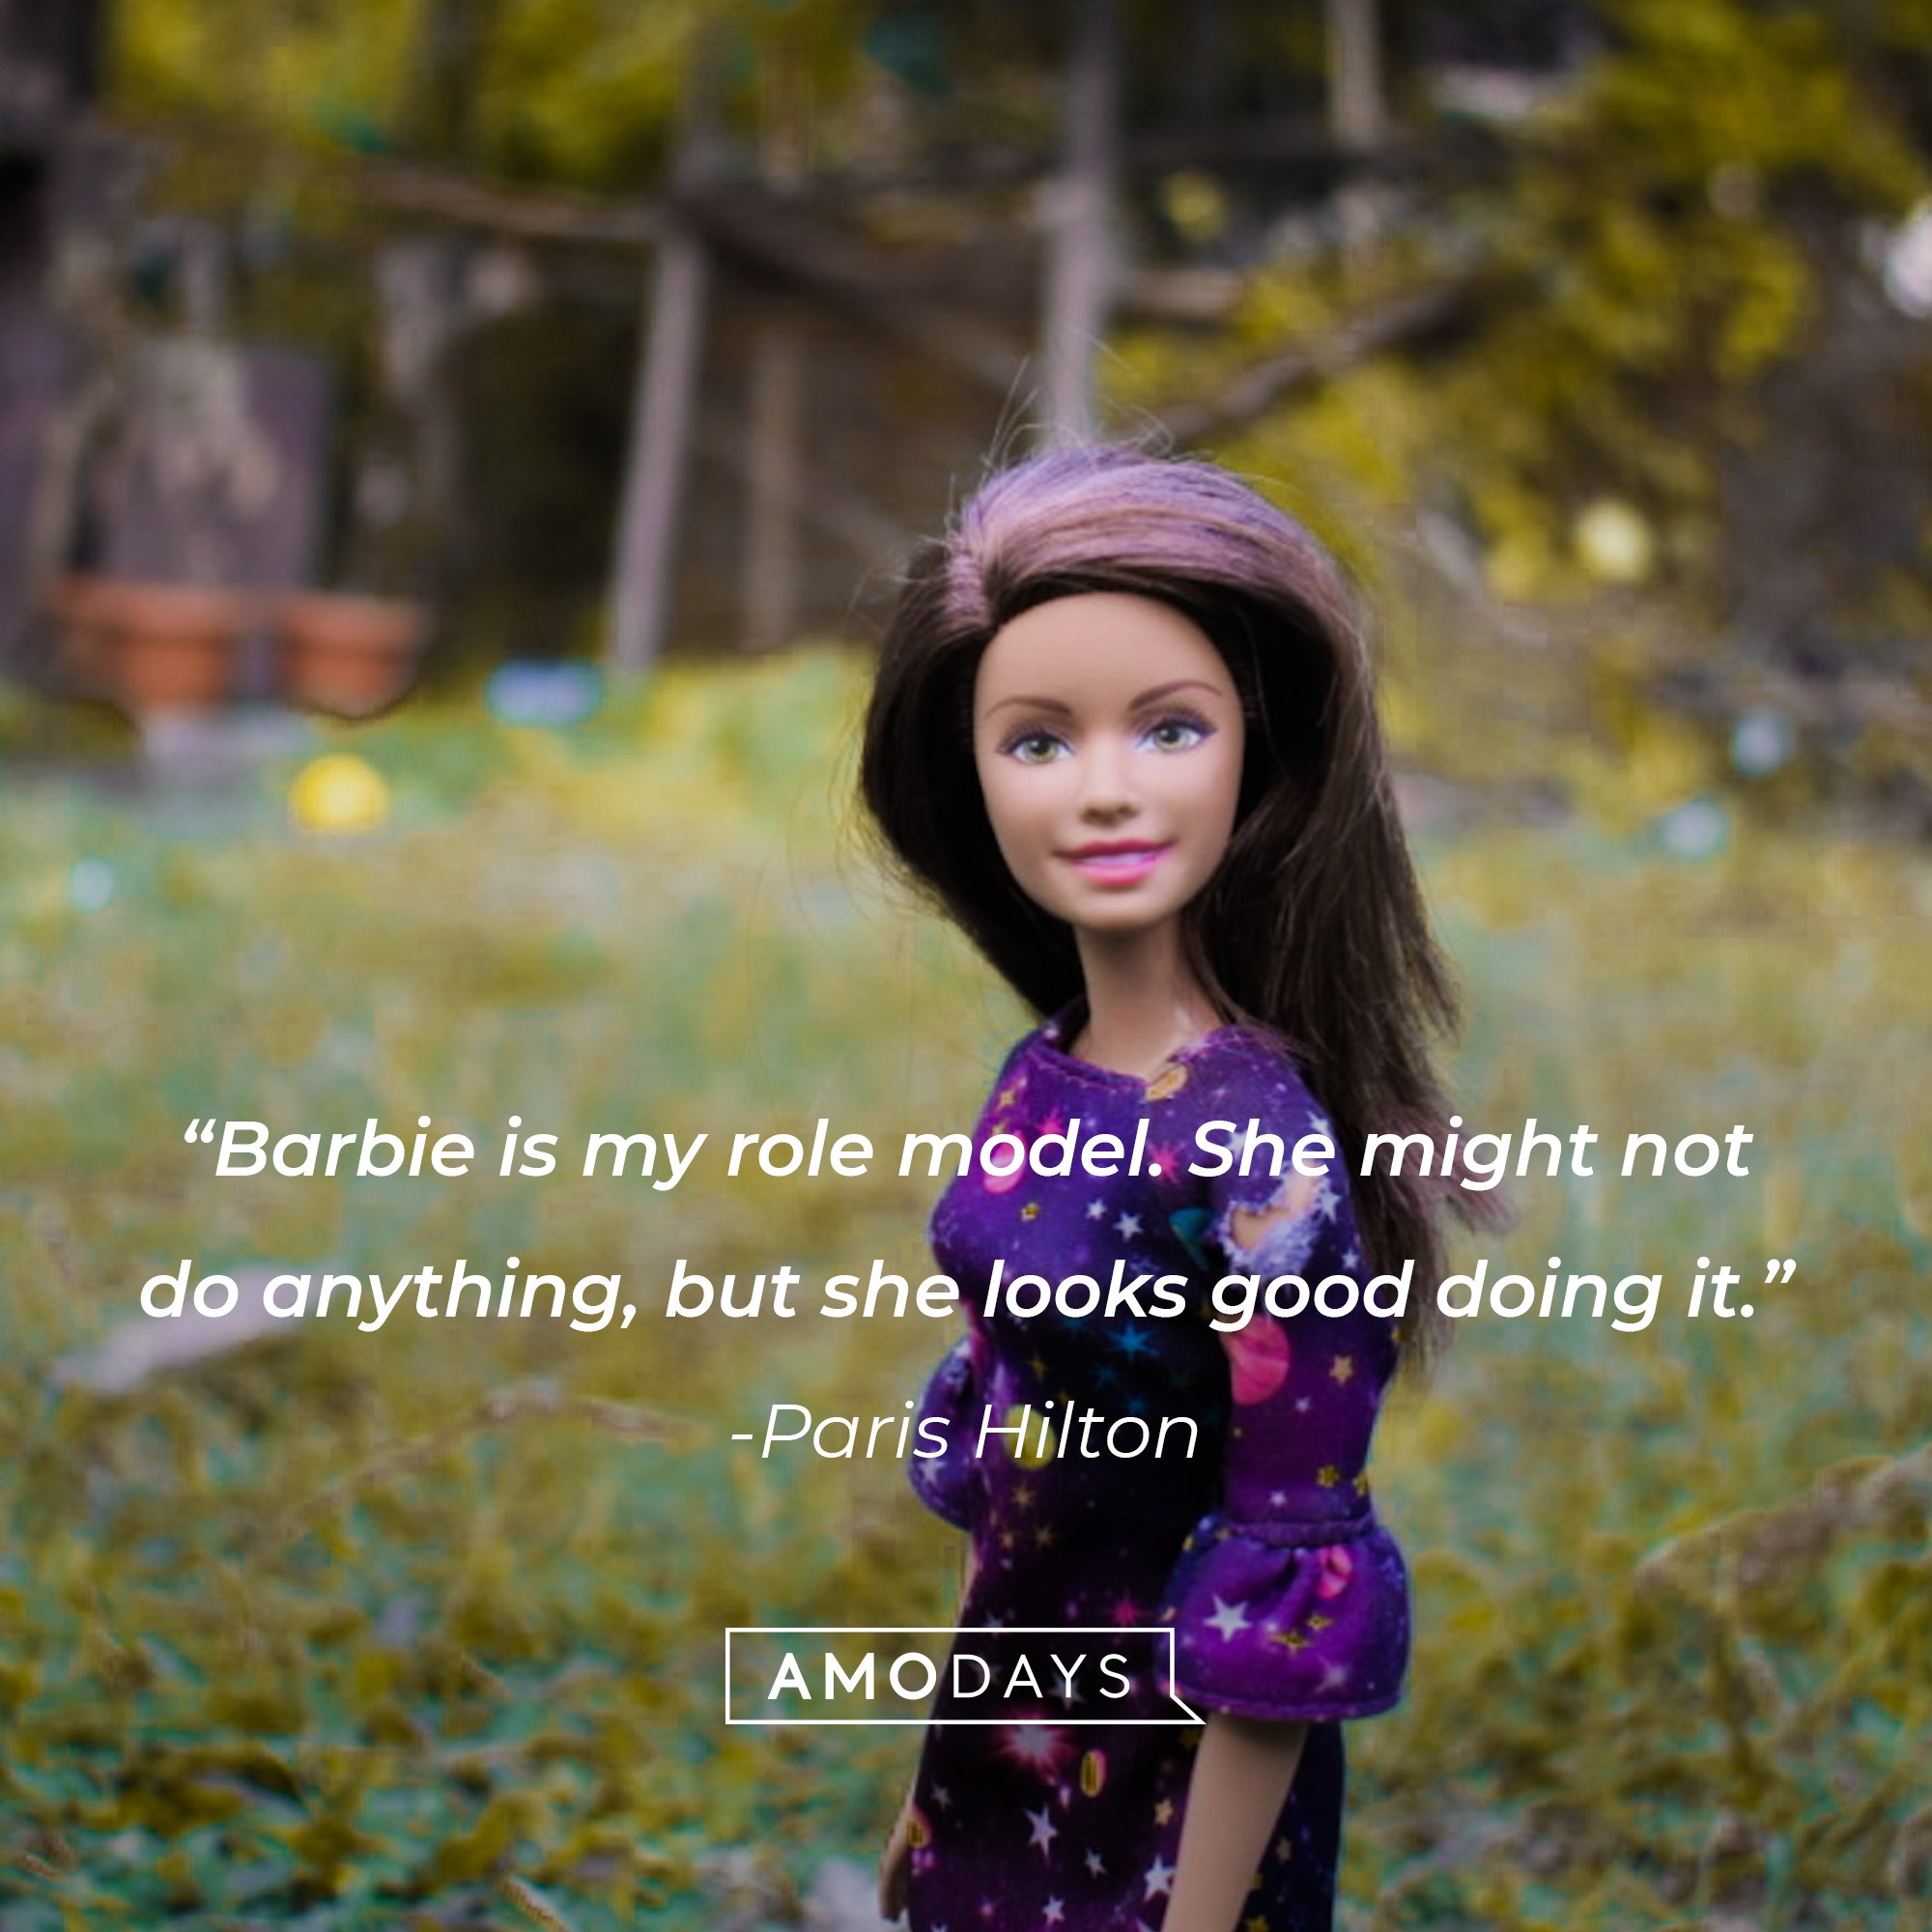 Paris Hilton's quote: "Barbie is my role model. She might not do anything, but she looks good doing it." | Image: AmoDays